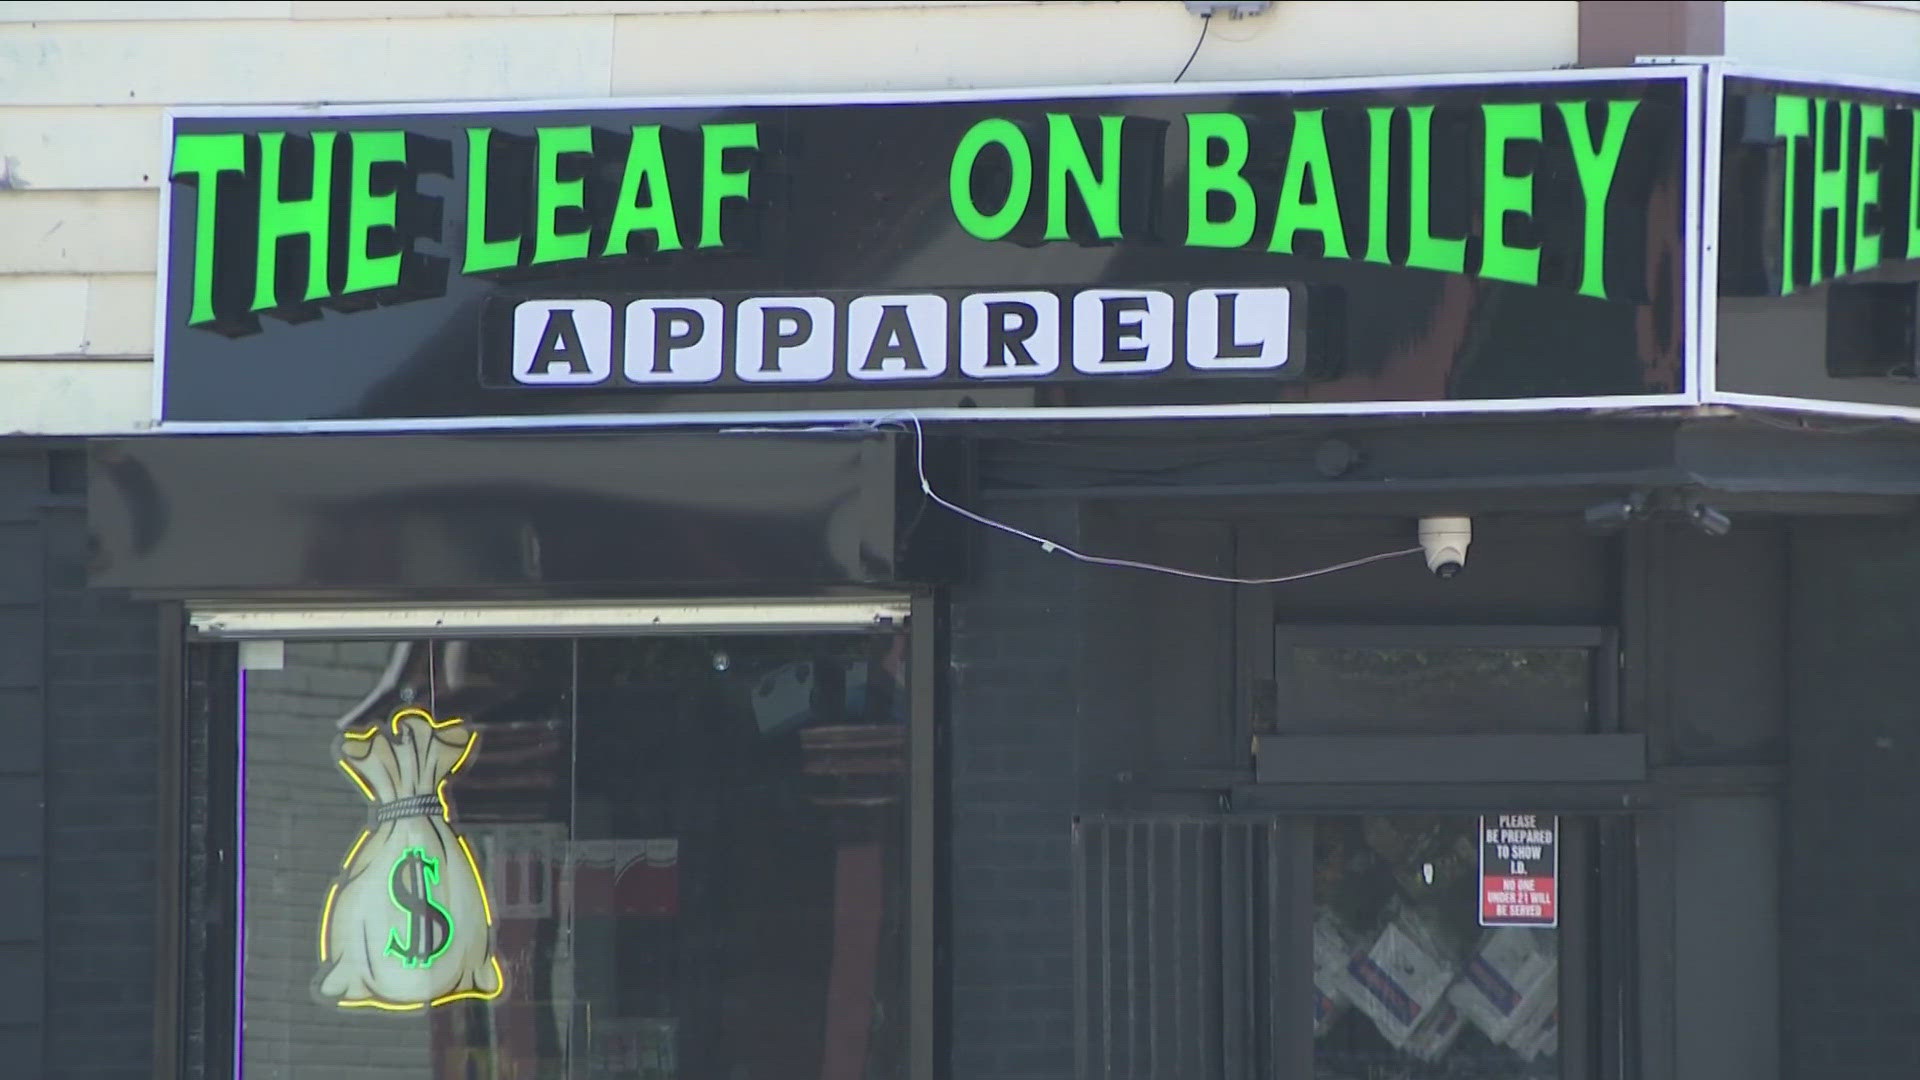 A Buffalo corner store is under close scrutiny after residents and city officials say they are selling cannabis illegally.